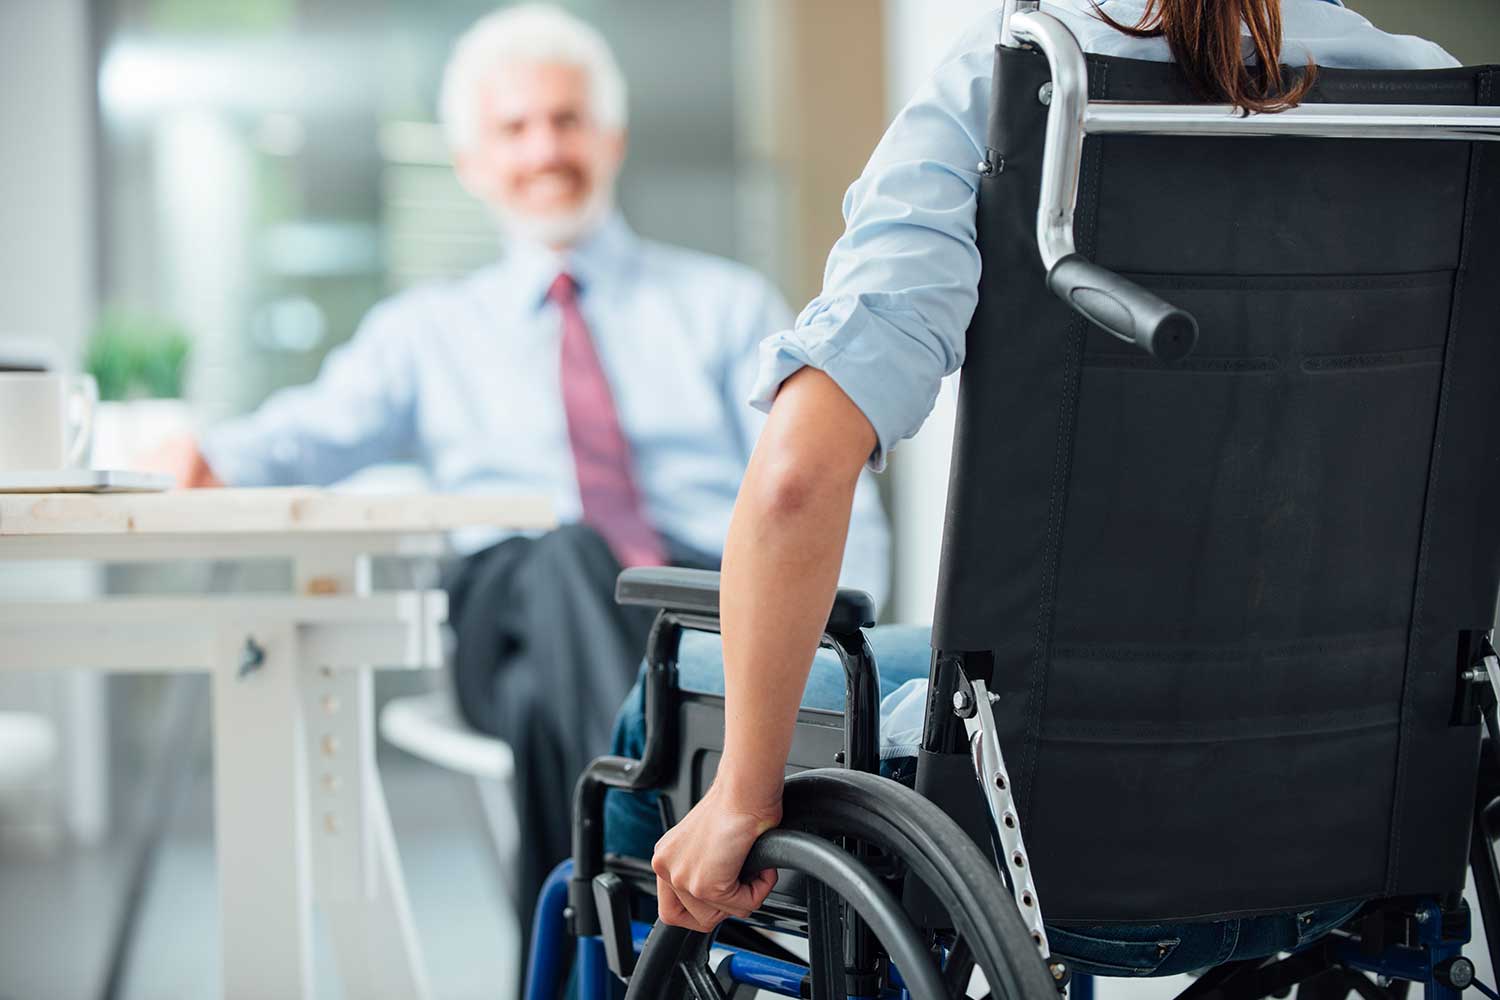 A person in a wheelchair is seen from behind, from the shoulders down. They are sitting across from a businessman, out of focus.